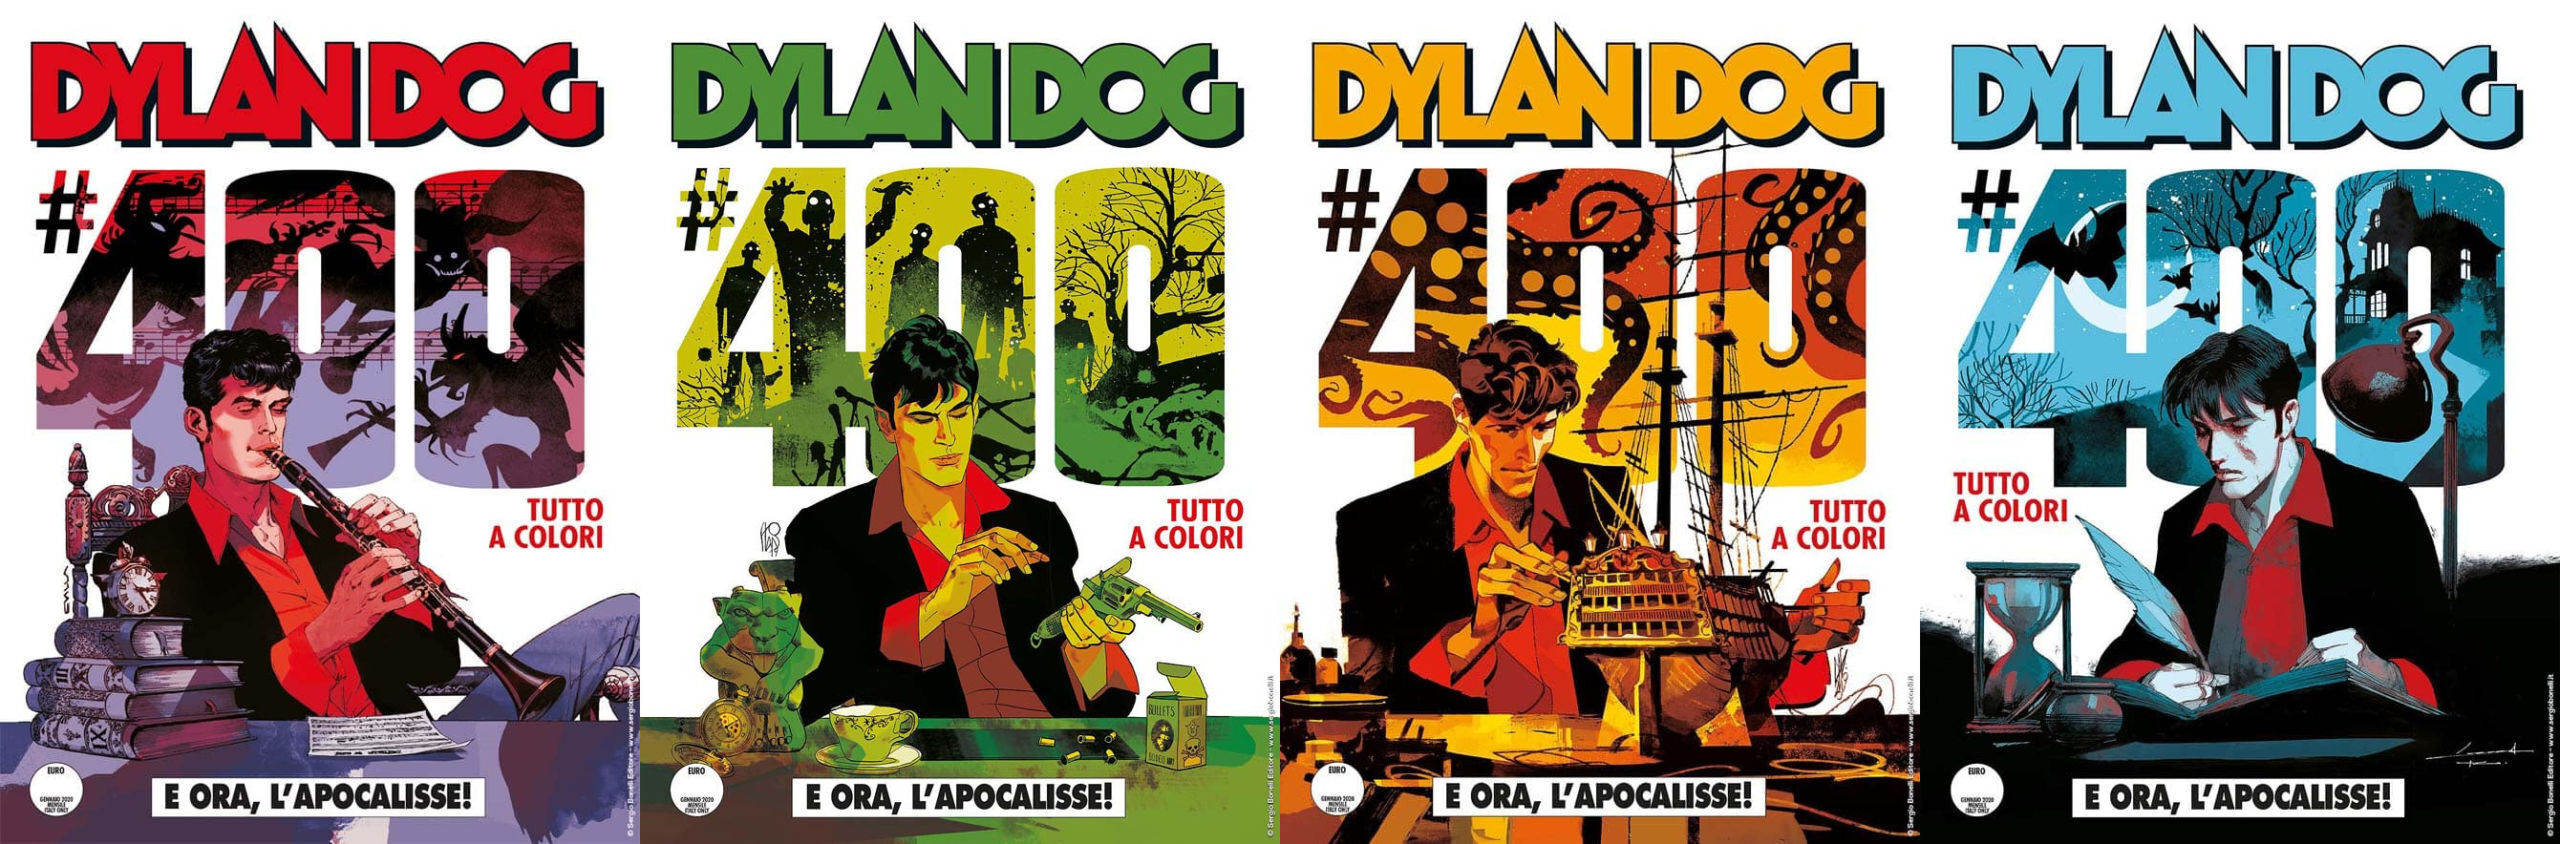 COVER  STANO L'APOCALISSE DYLAN DOG N.400 E ORA NUOVO  "N" 